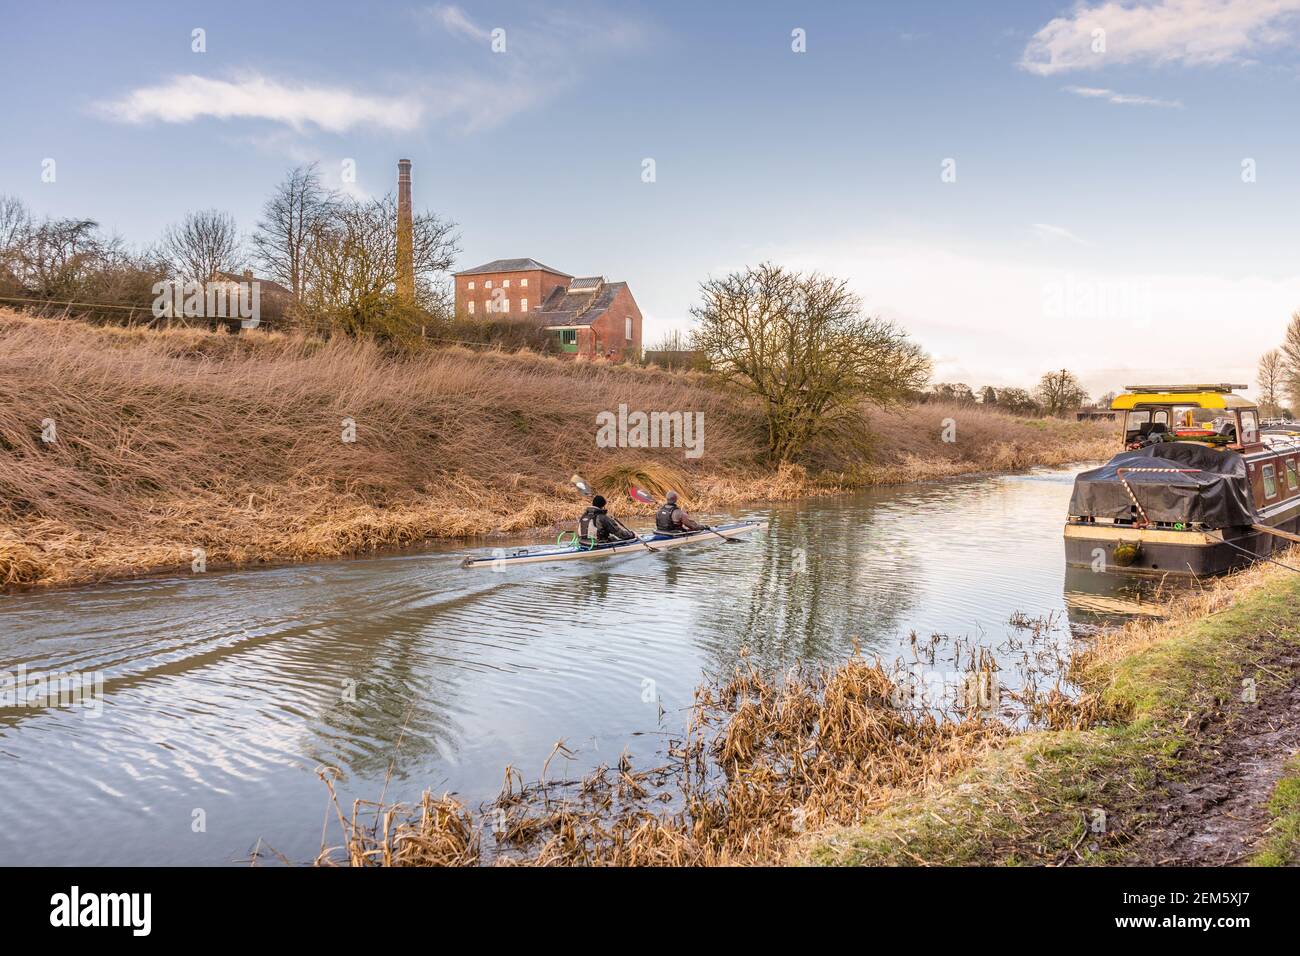 People canoeing on the Kennet and Avon Canal in Wiltshire with the Crofton beam engines pumping station in the background, Wiltshire, England, UK Stock Photo